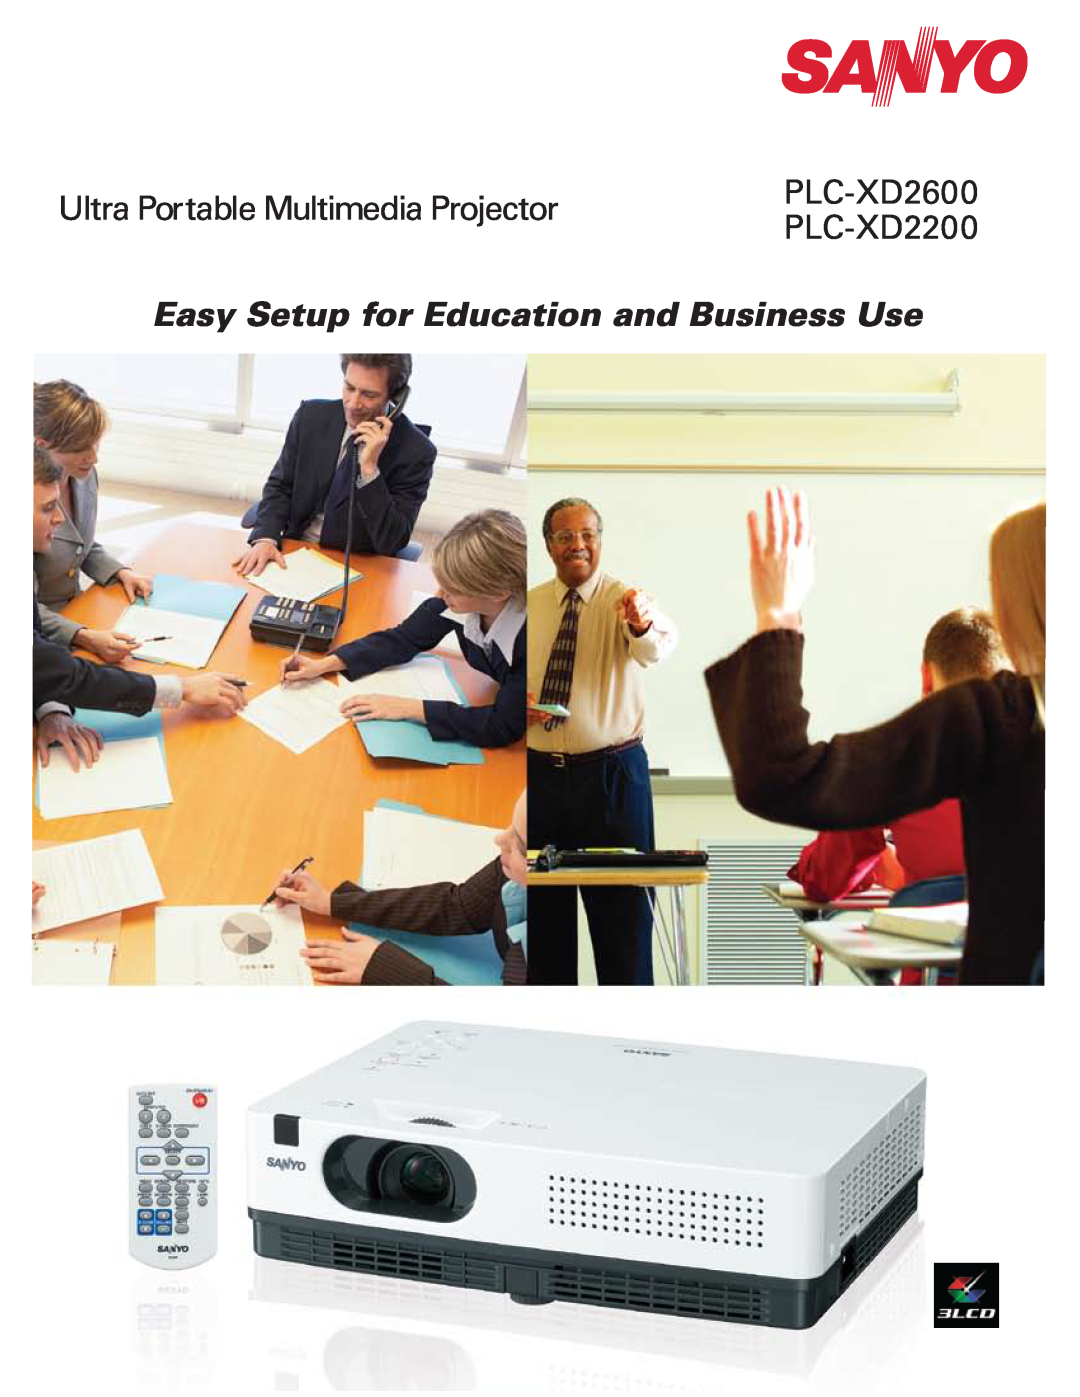 Sanyo PLC-XD2600 manual Ultra Portable Multimedia Projector, Easy Setup for Education and Business Use, PLC-XD2200 